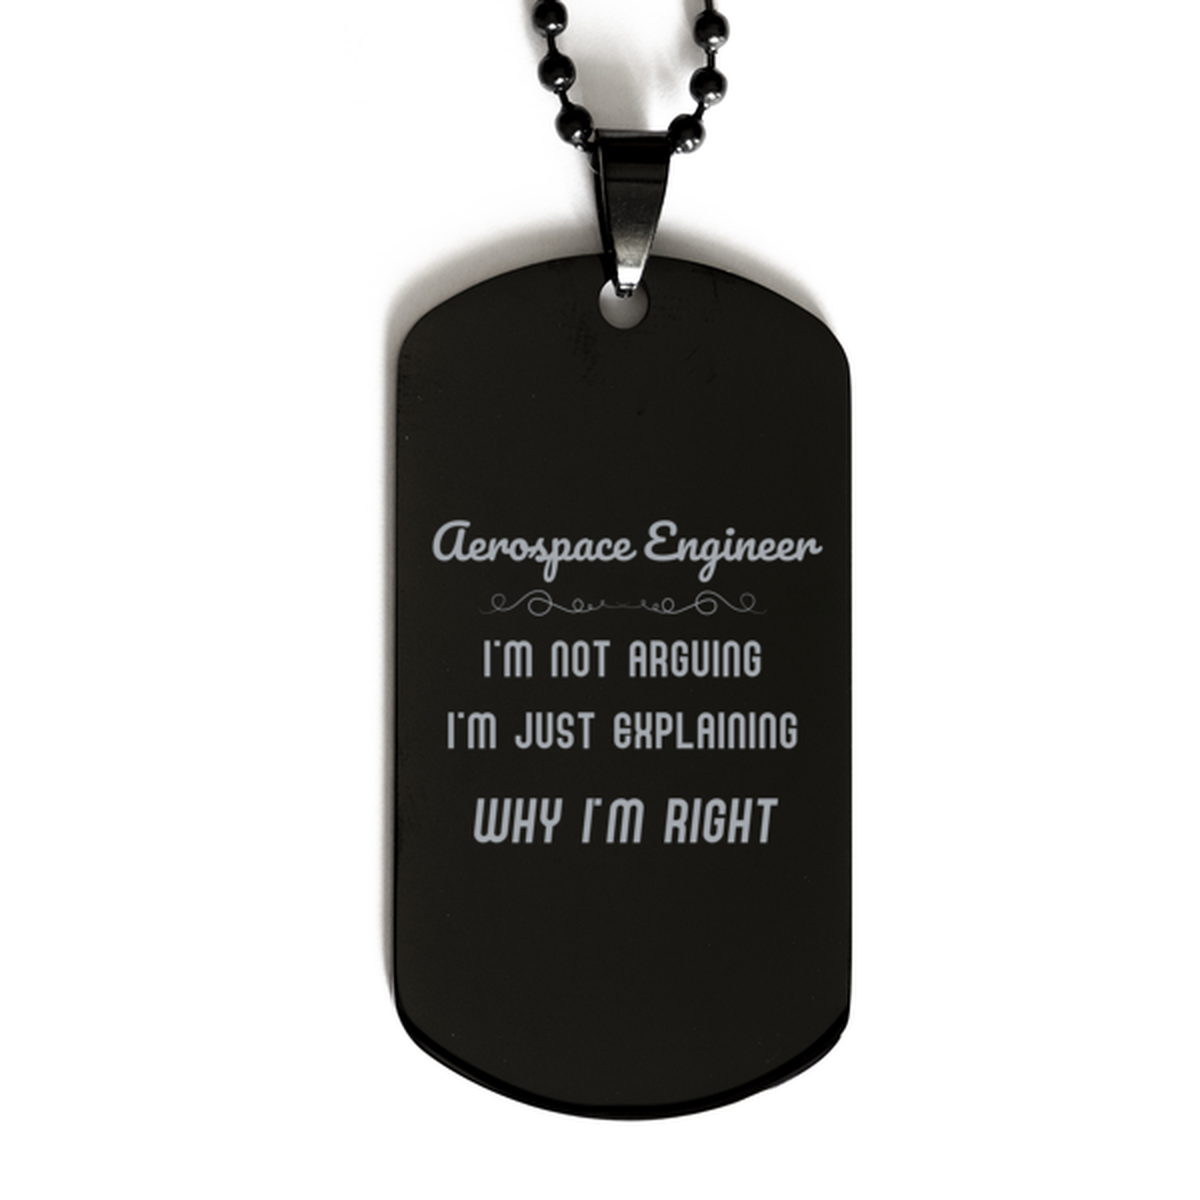 Aerospace Engineer I'm not Arguing. I'm Just Explaining Why I'm RIGHT Black Dog Tag, Funny Saying Quote Aerospace Engineer Gifts For Aerospace Engineer Graduation Birthday Christmas Gifts for Men Women Coworker